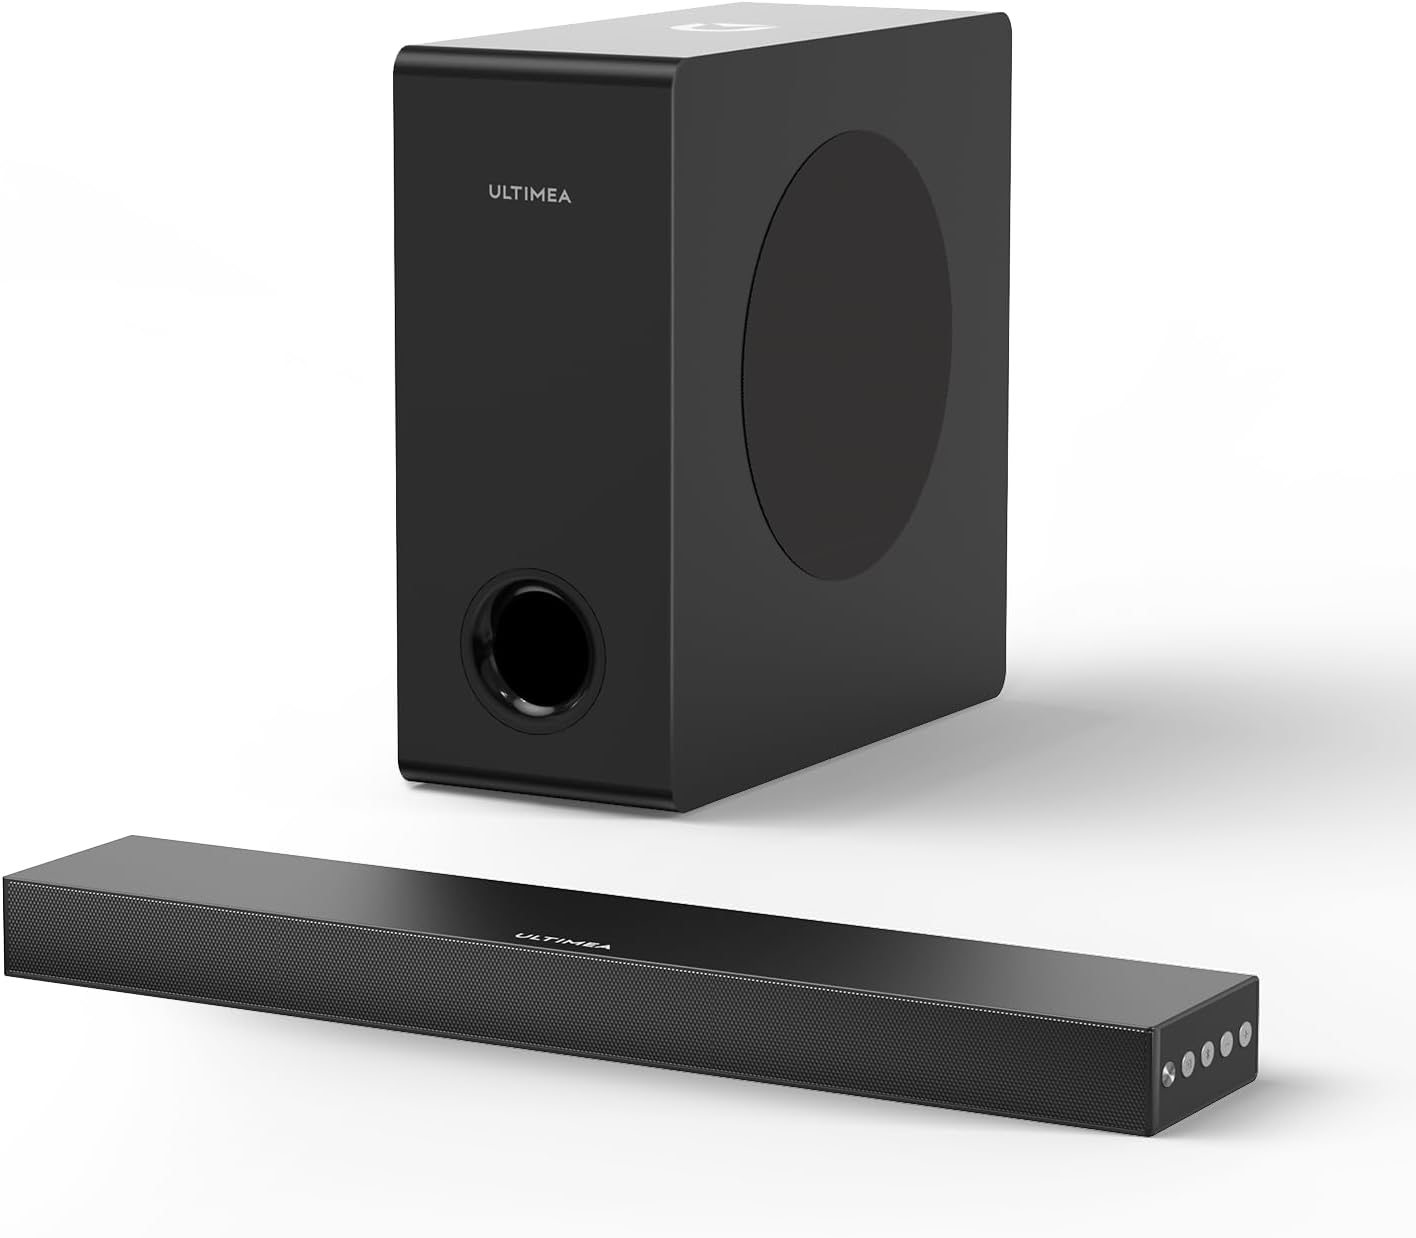 ULTIMEA Sound Bars with Subwoofer Review